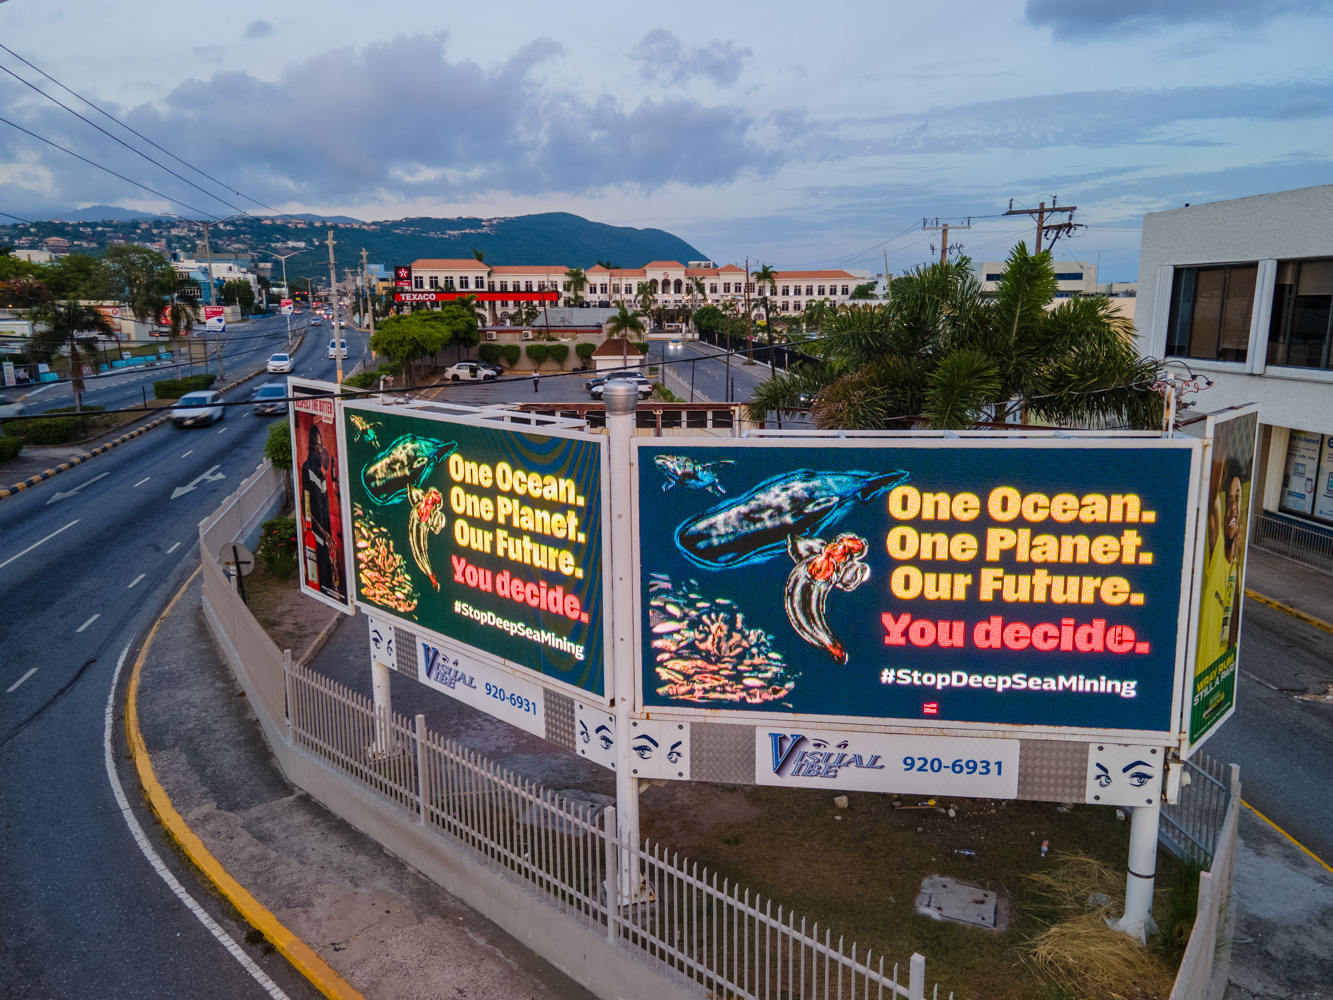 Billboard advert on a street corner. The advert reads 'One ocean. One Planet. Our future. You decide. Hashtag stop deep sea mining' with images of deep sea creatures alongside.